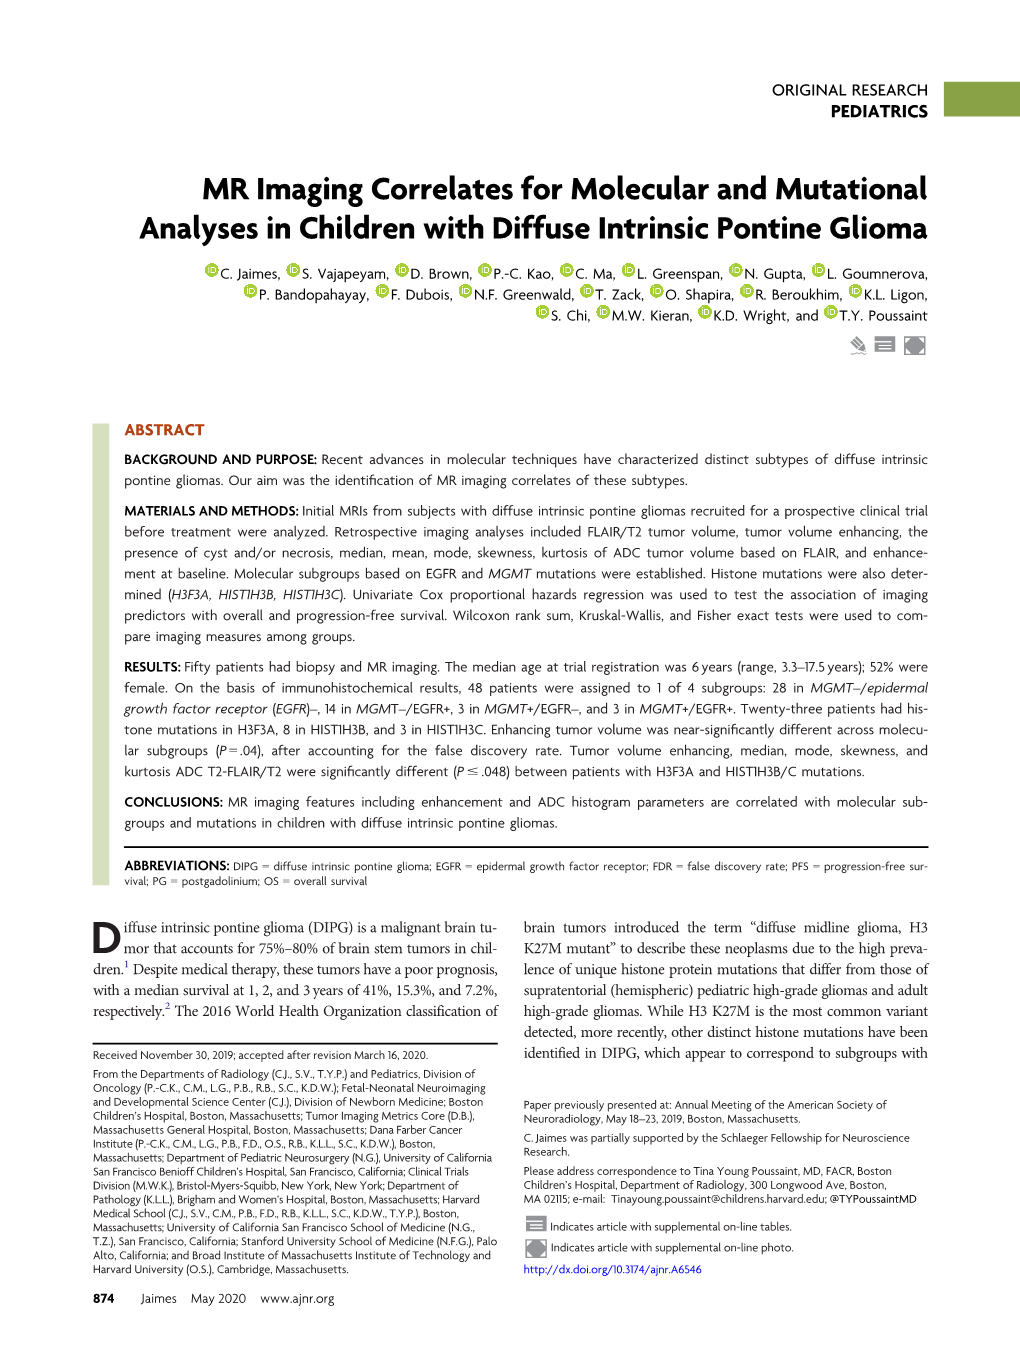 MR Imaging Correlates for Molecular and Mutational Analyses in Children with Diffuse Intrinsic Pontine Glioma